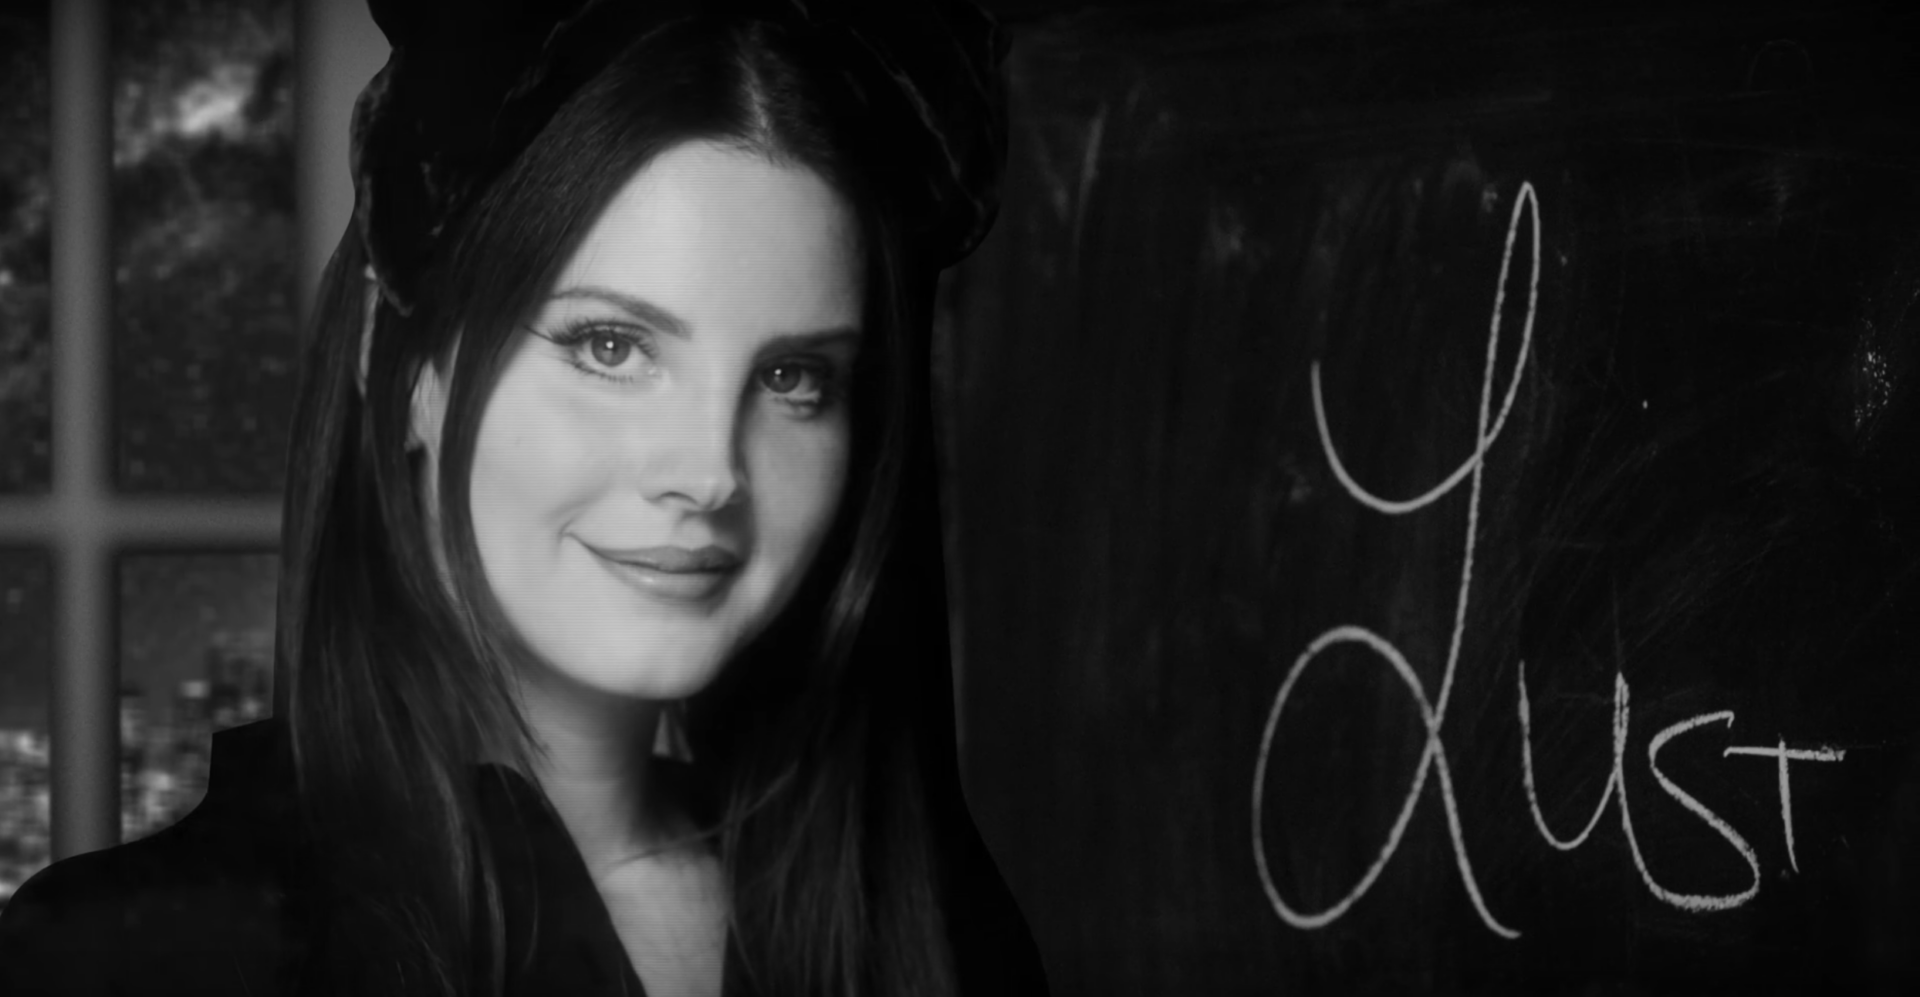 Lana Del Rey releases dreamy video to announce new album ‘Lust For Life’